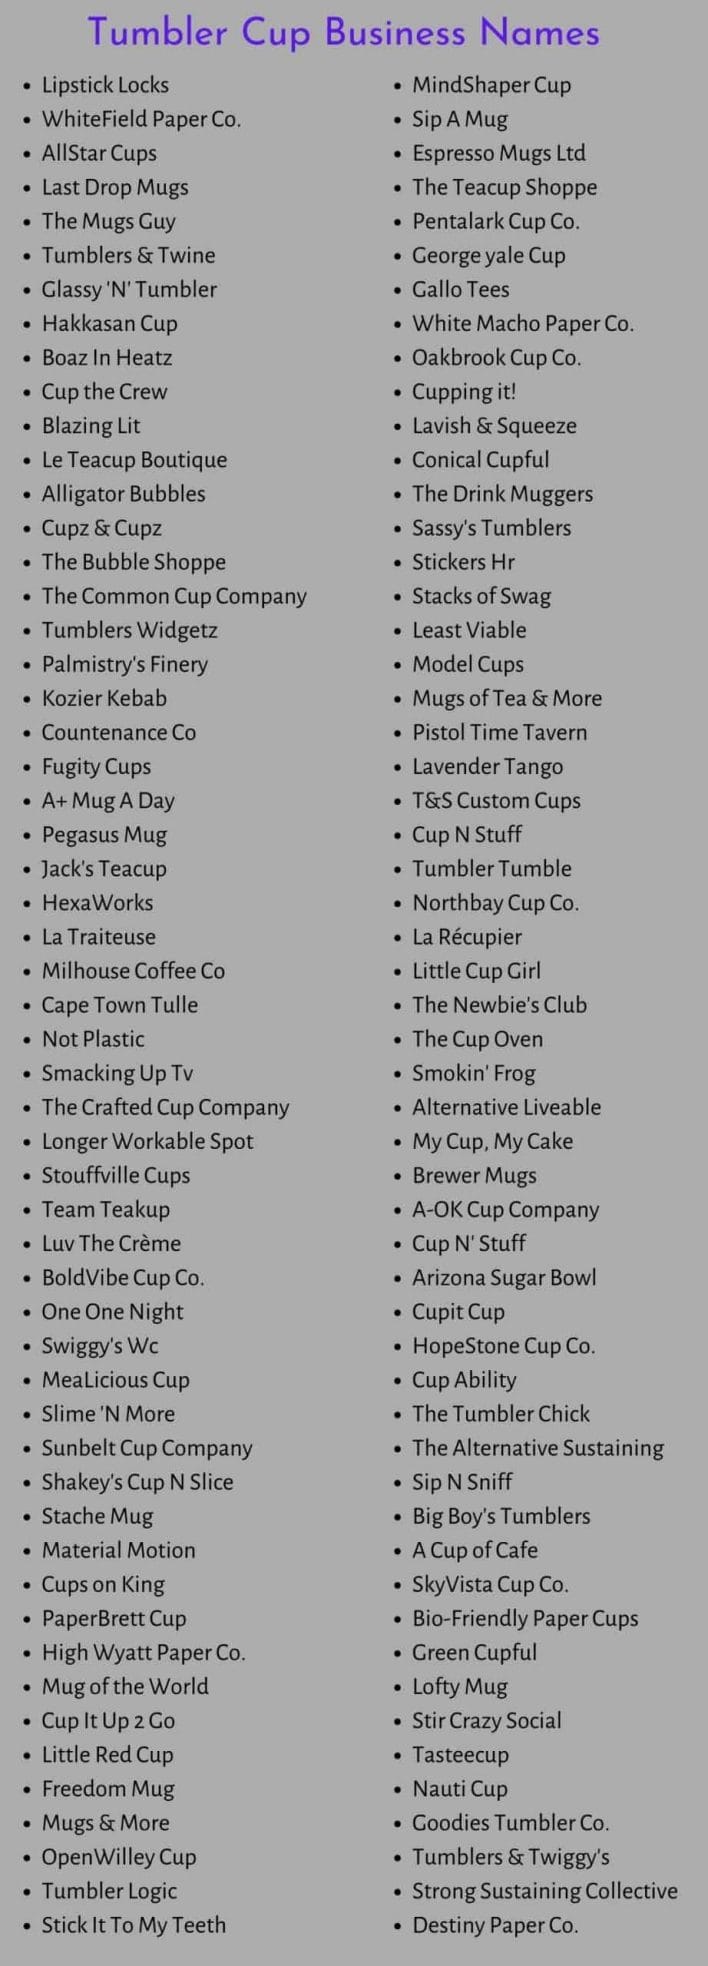 Tumbler Cup Business Names